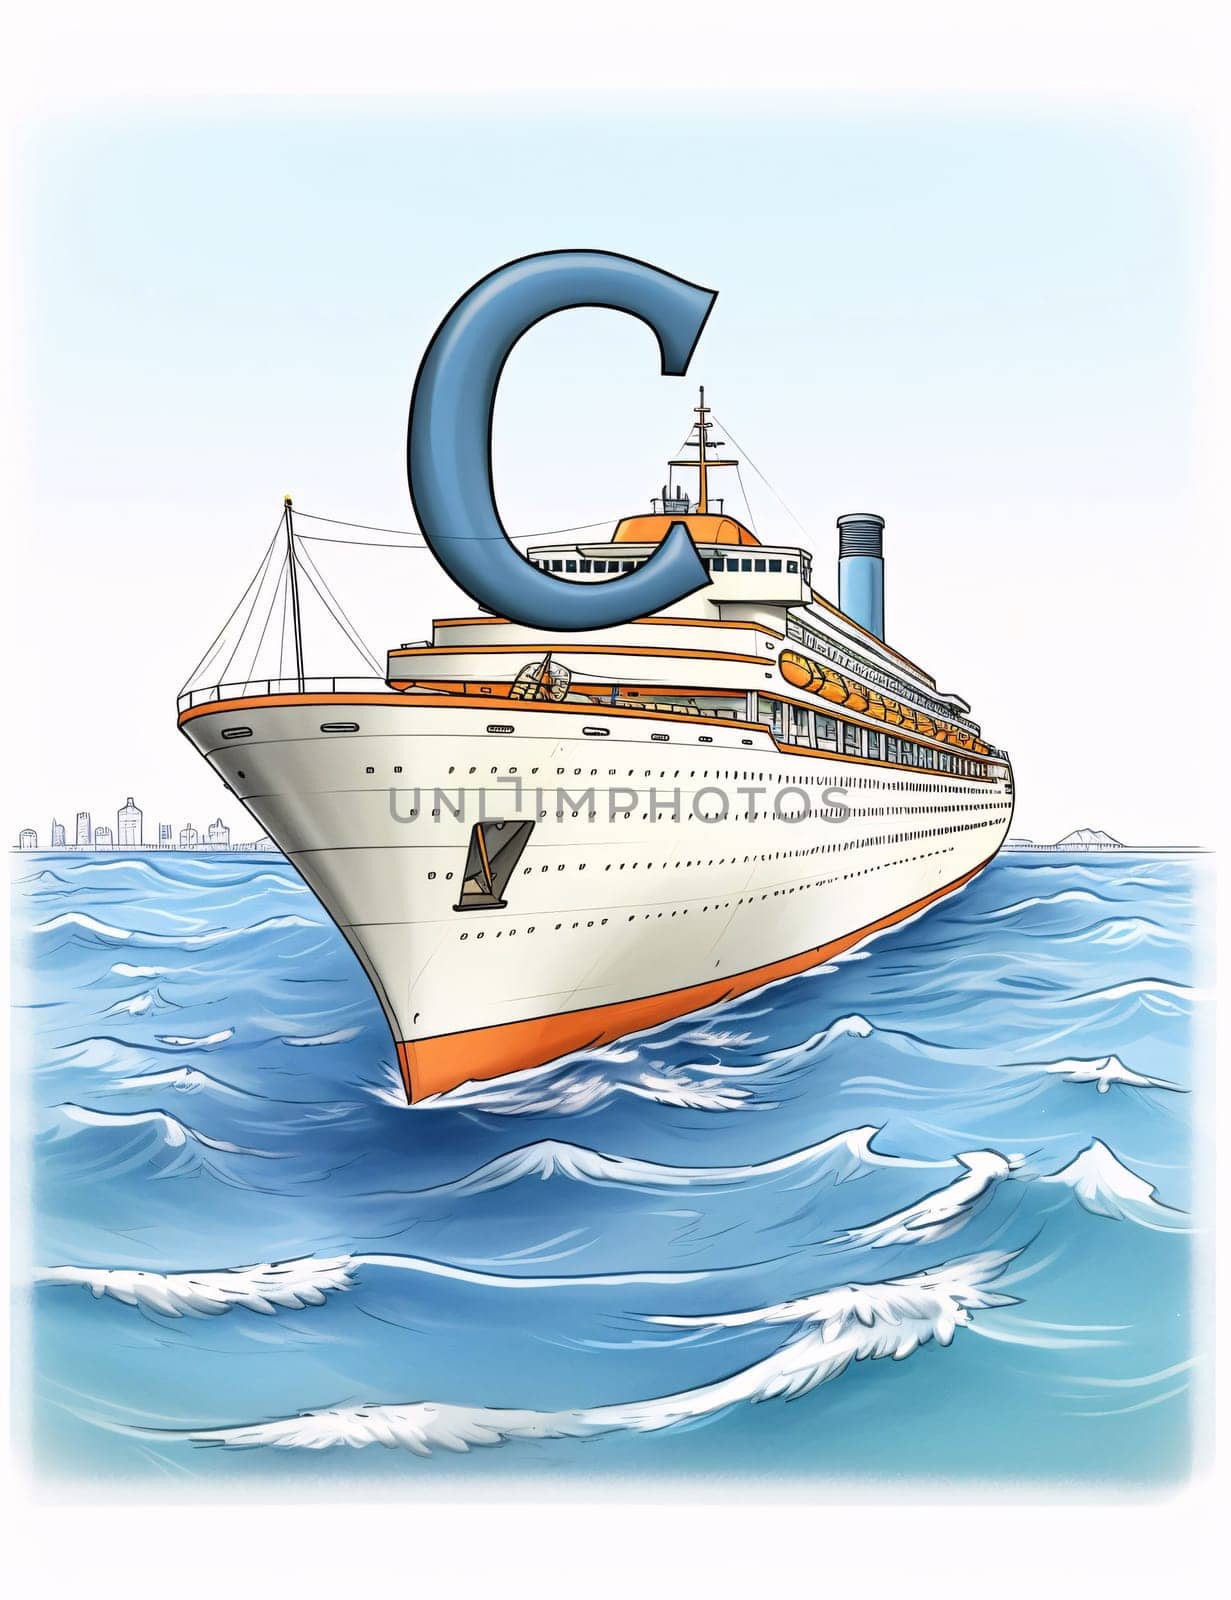 Graphic alphabet letters: Cruise ship in the sea with a blue arrow. Vector illustration.